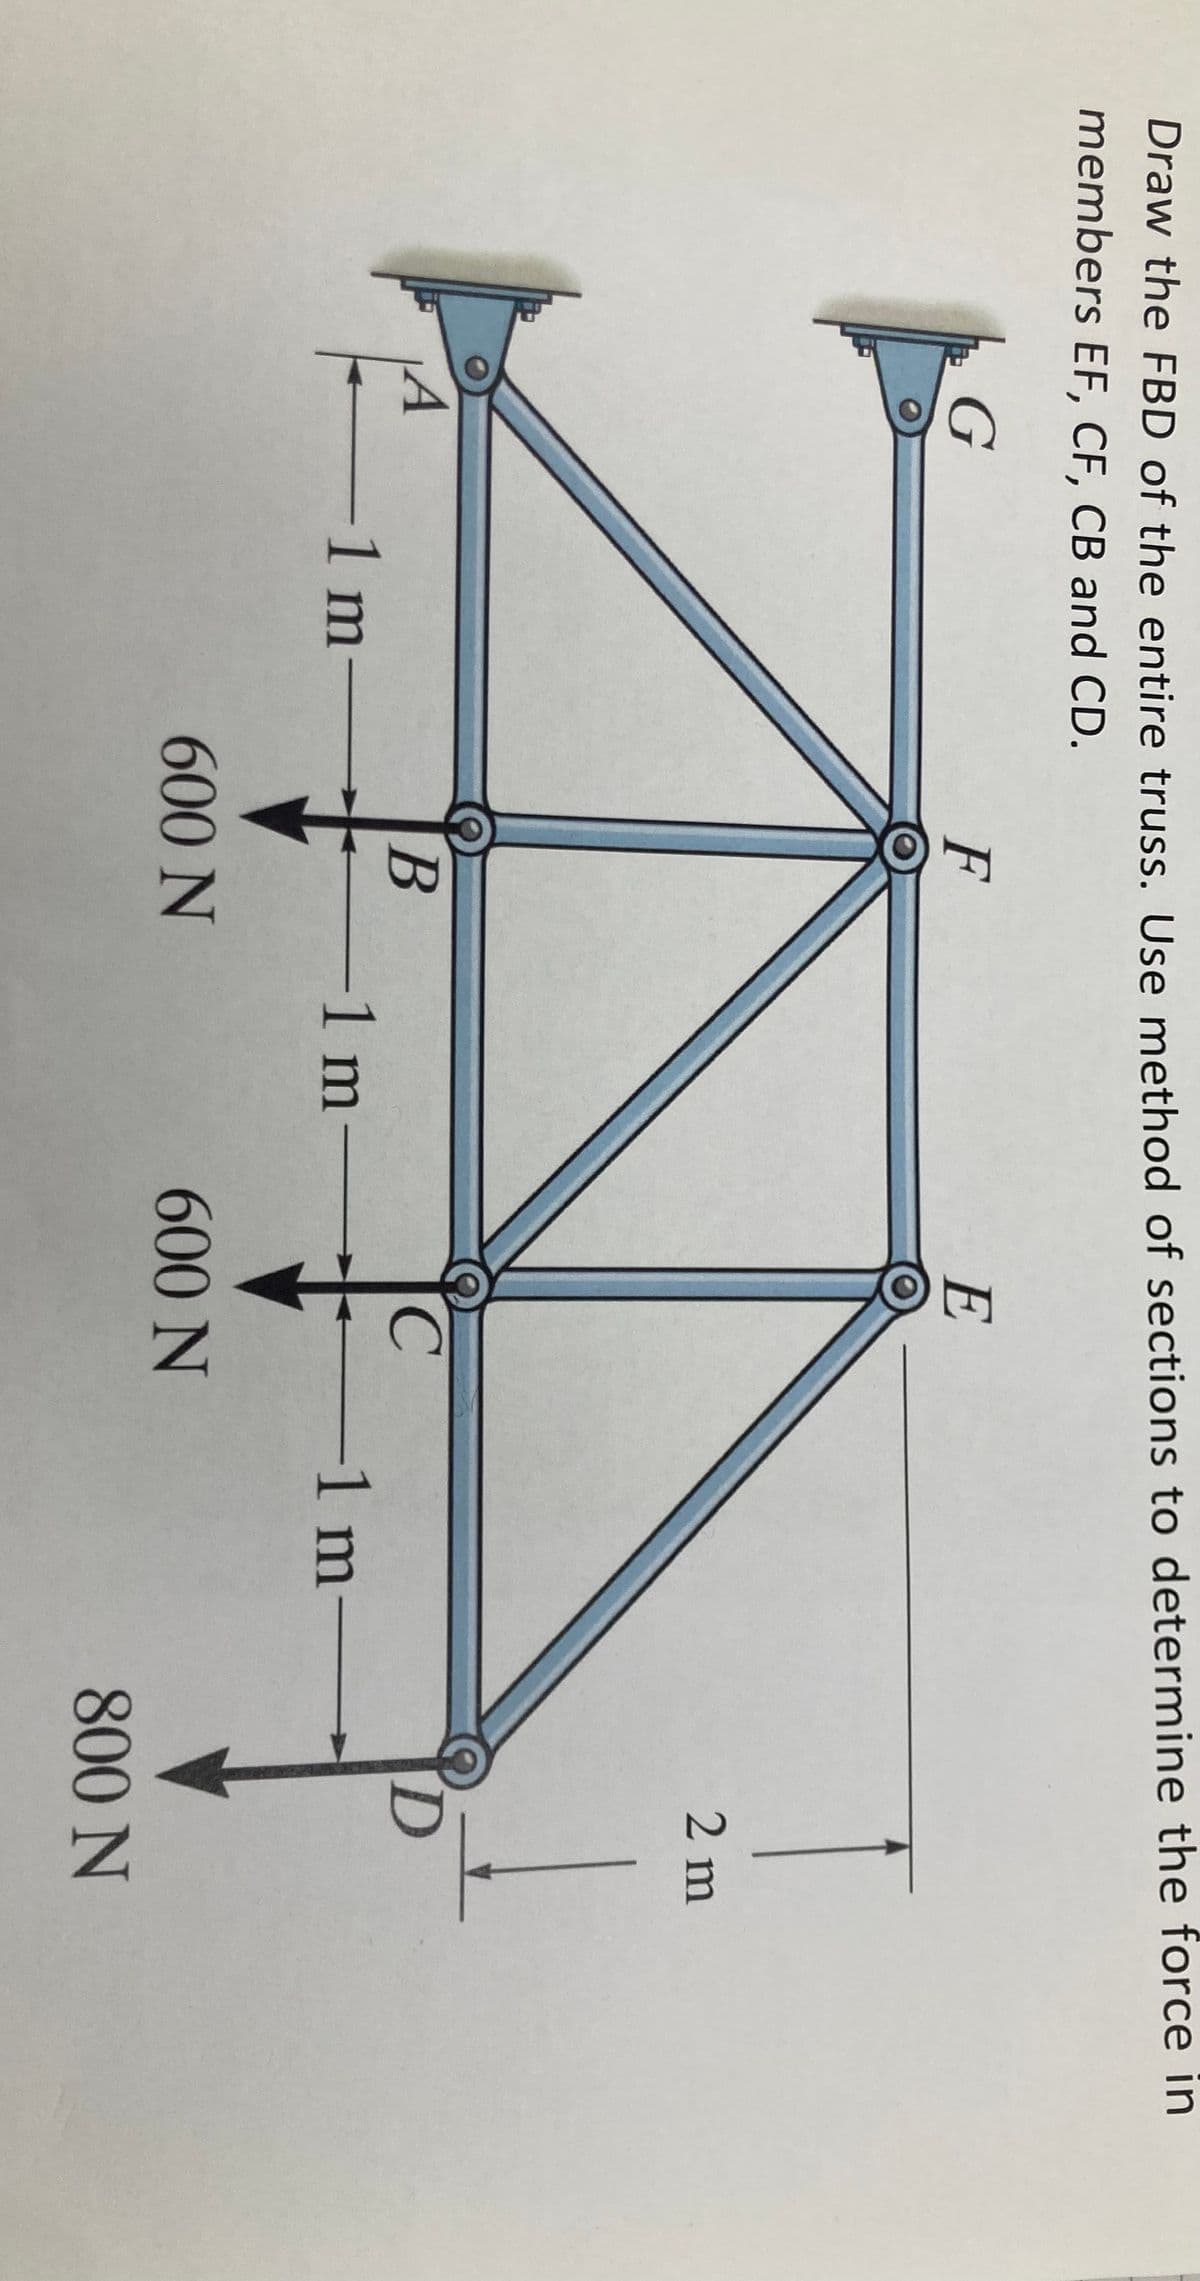 Draw the FBD of the entire truss. Use method of sections to determine the force in
members EF, CF, CB and CD.
G
A
-1 m-
F
B
600 N
-1 m-
E
C
600 N
-1 m-
2 m
D
800 N